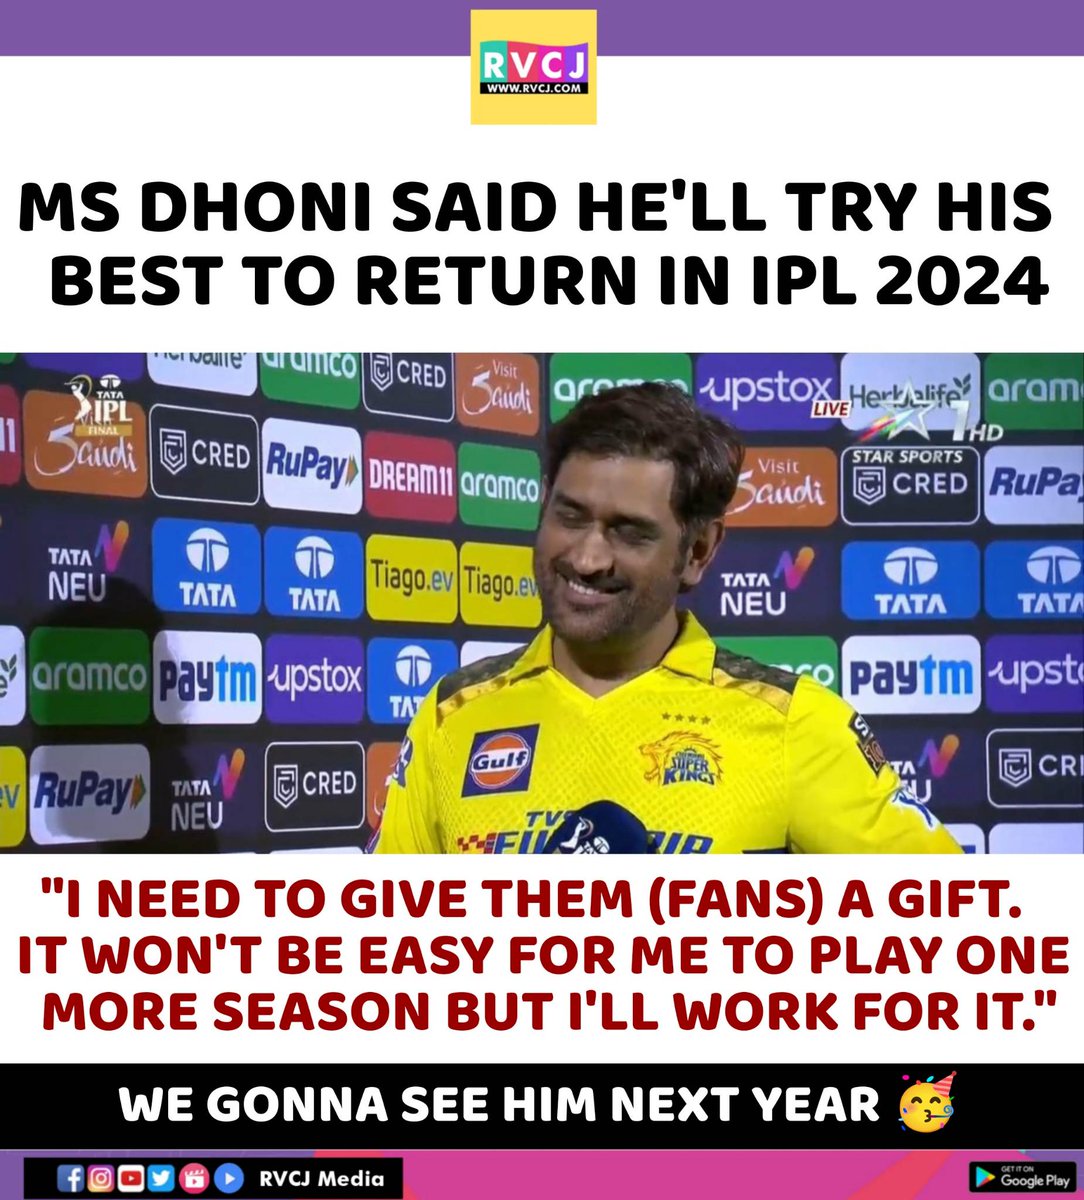 Happy News for MS Dhoni Fans
#IPL2023 #CSKvGT #IPL2023Final